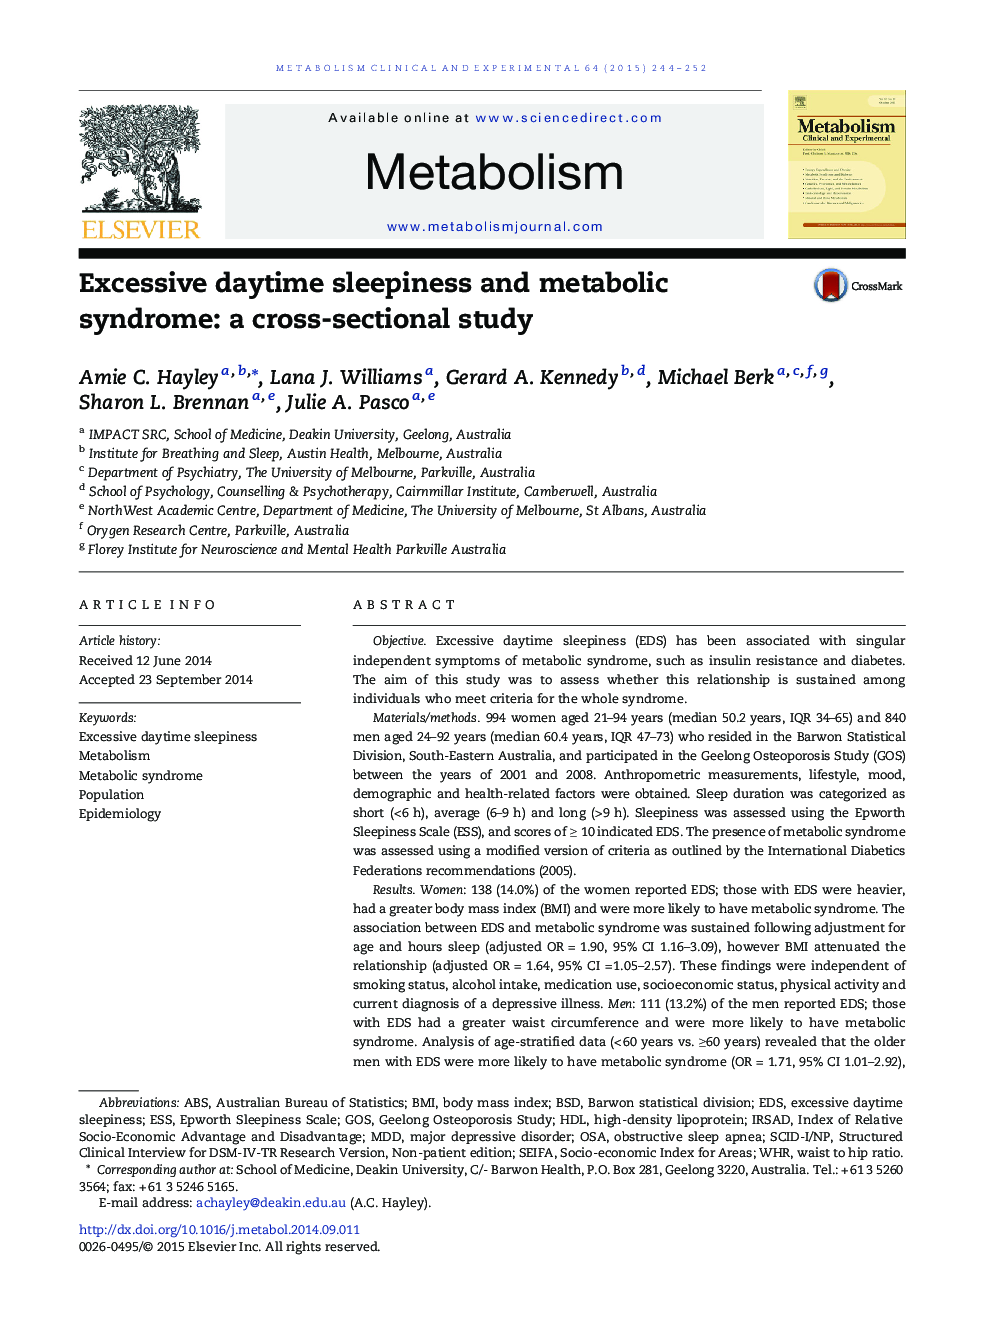 Excessive daytime sleepiness and metabolic syndrome: a cross-sectional study